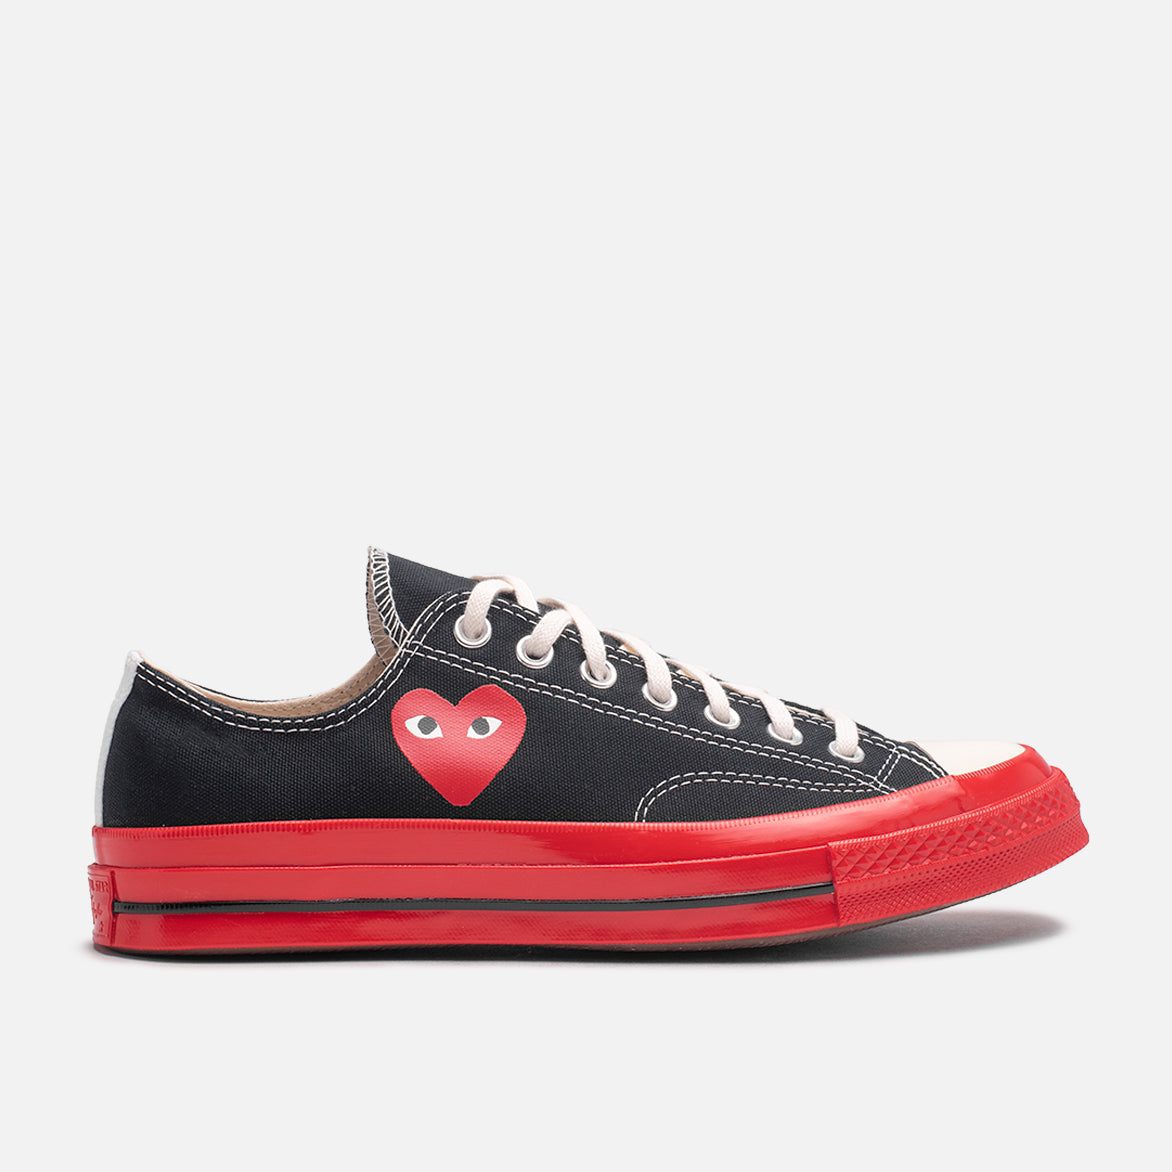 CDG PLAY CHUCK OX - BLACK / RED | lapstoneandhammer.com